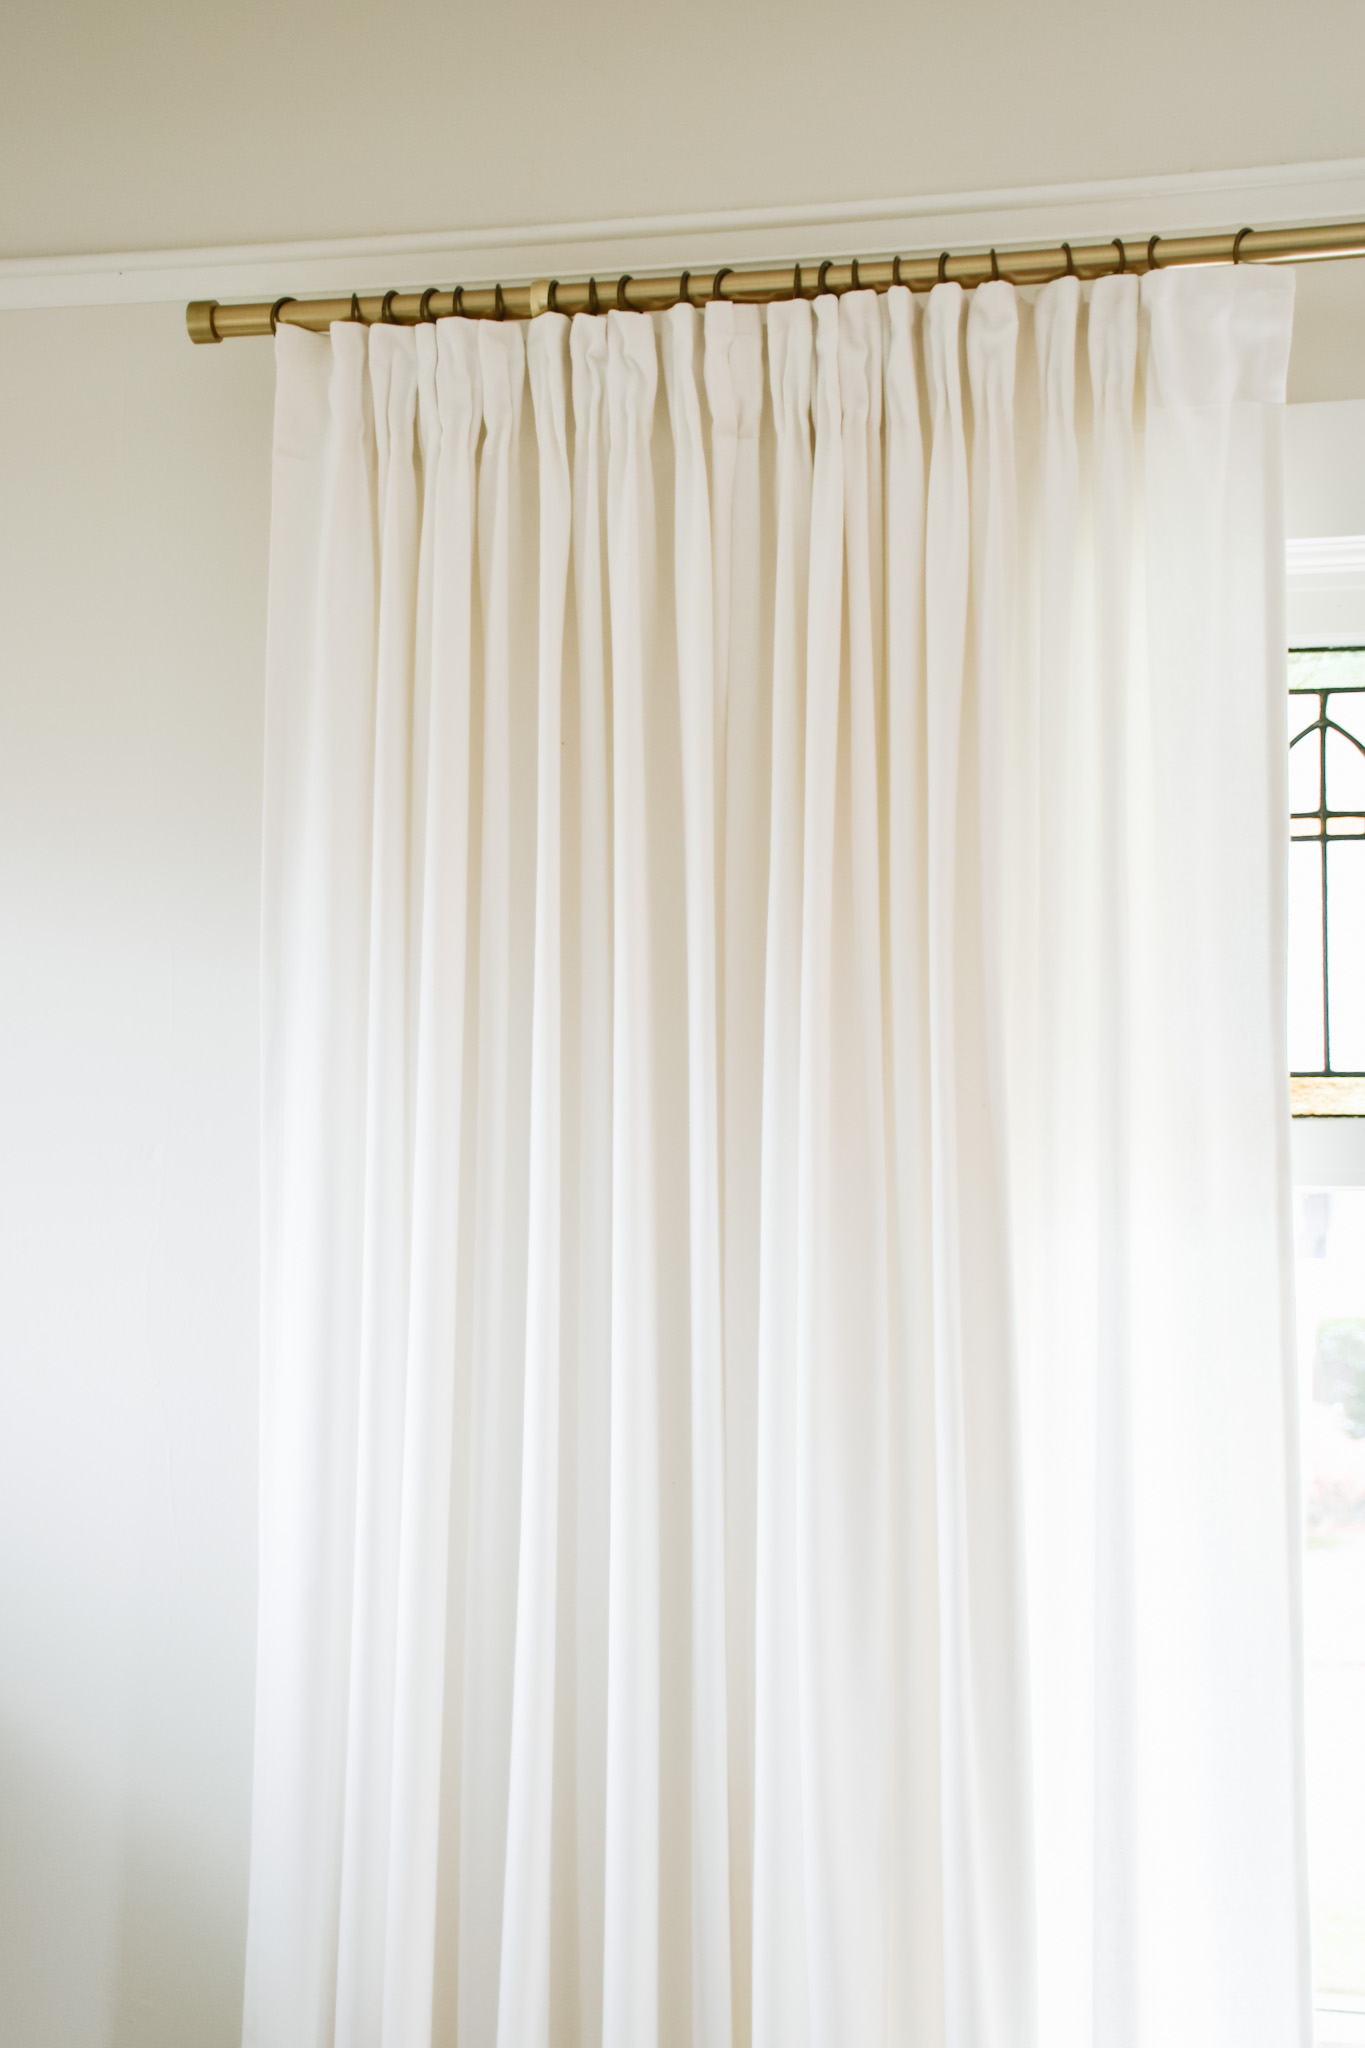 How to Sew Curtain Panels